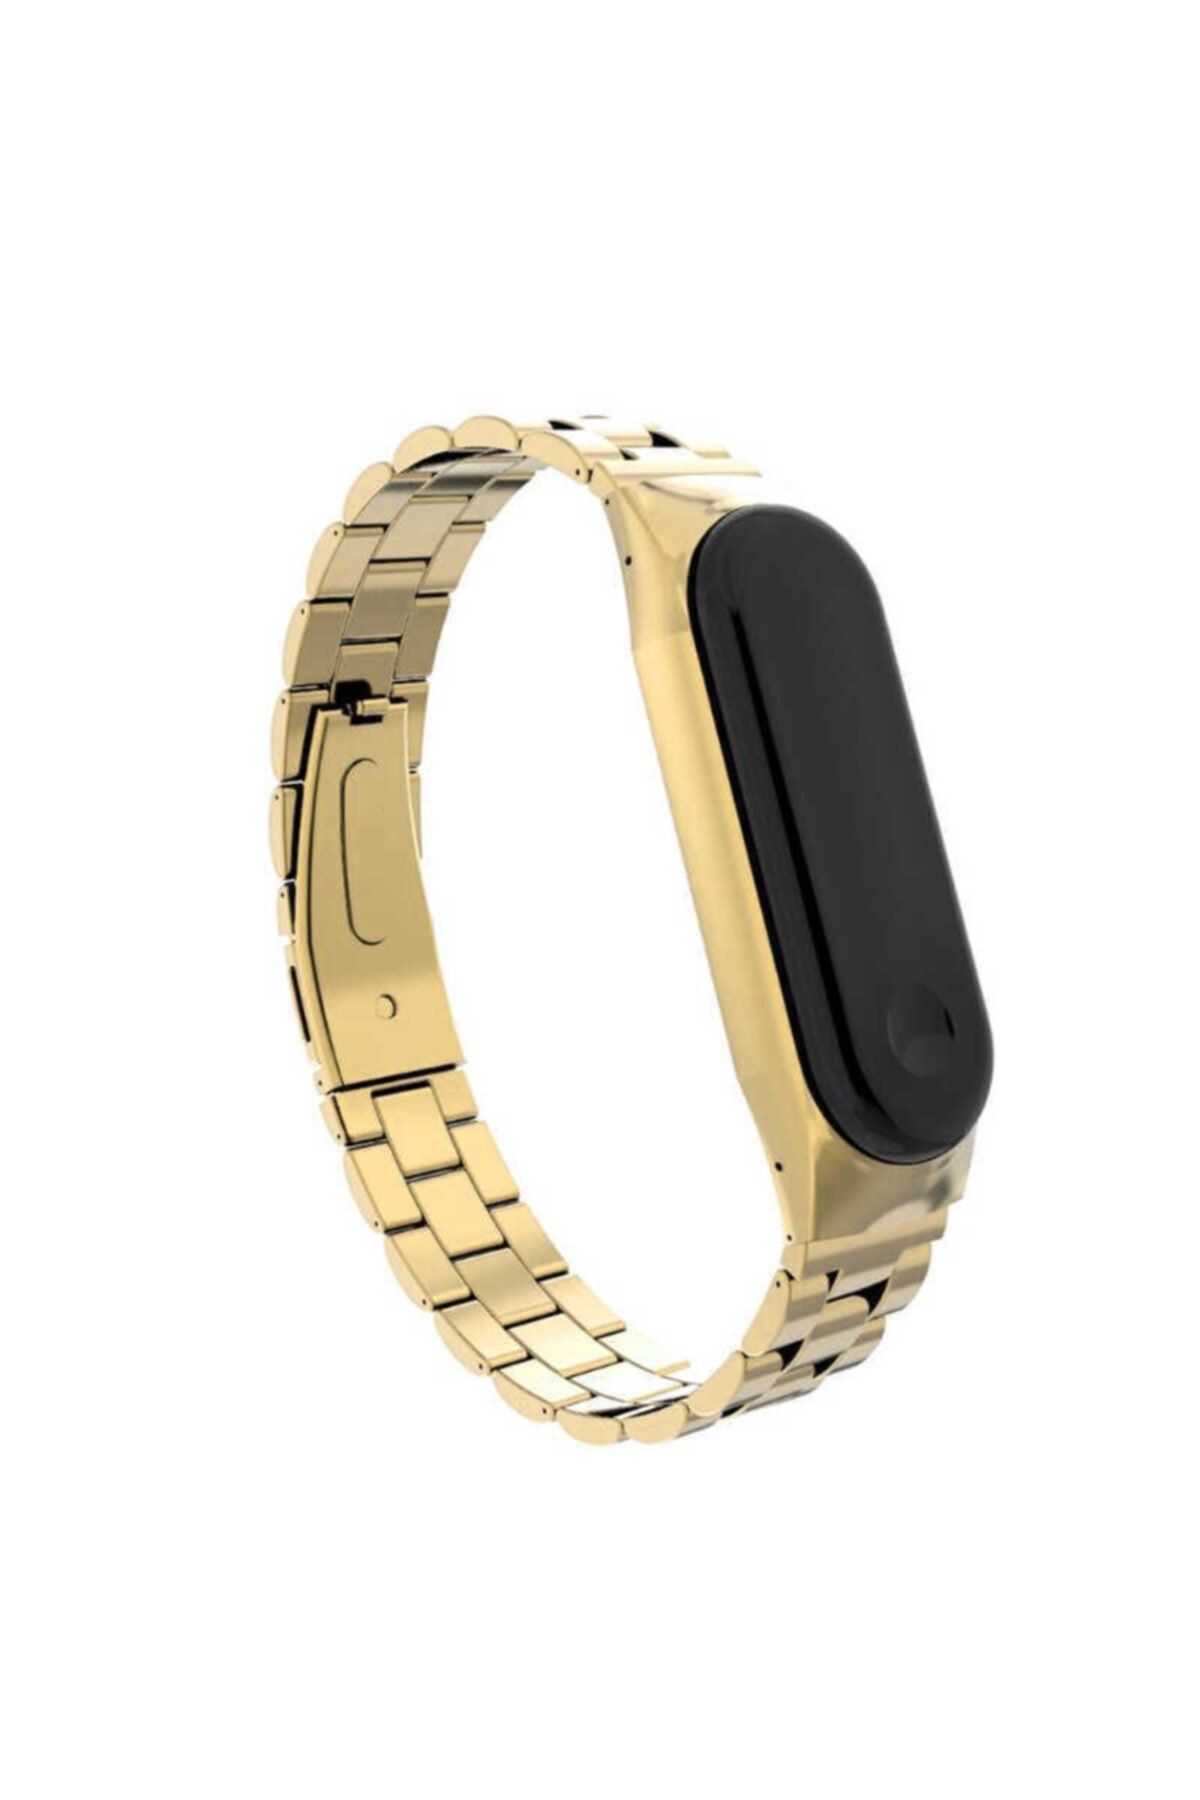 For Mi Band 5 Strap Metal Stainless Steel For Xiaomi Mi Band 5